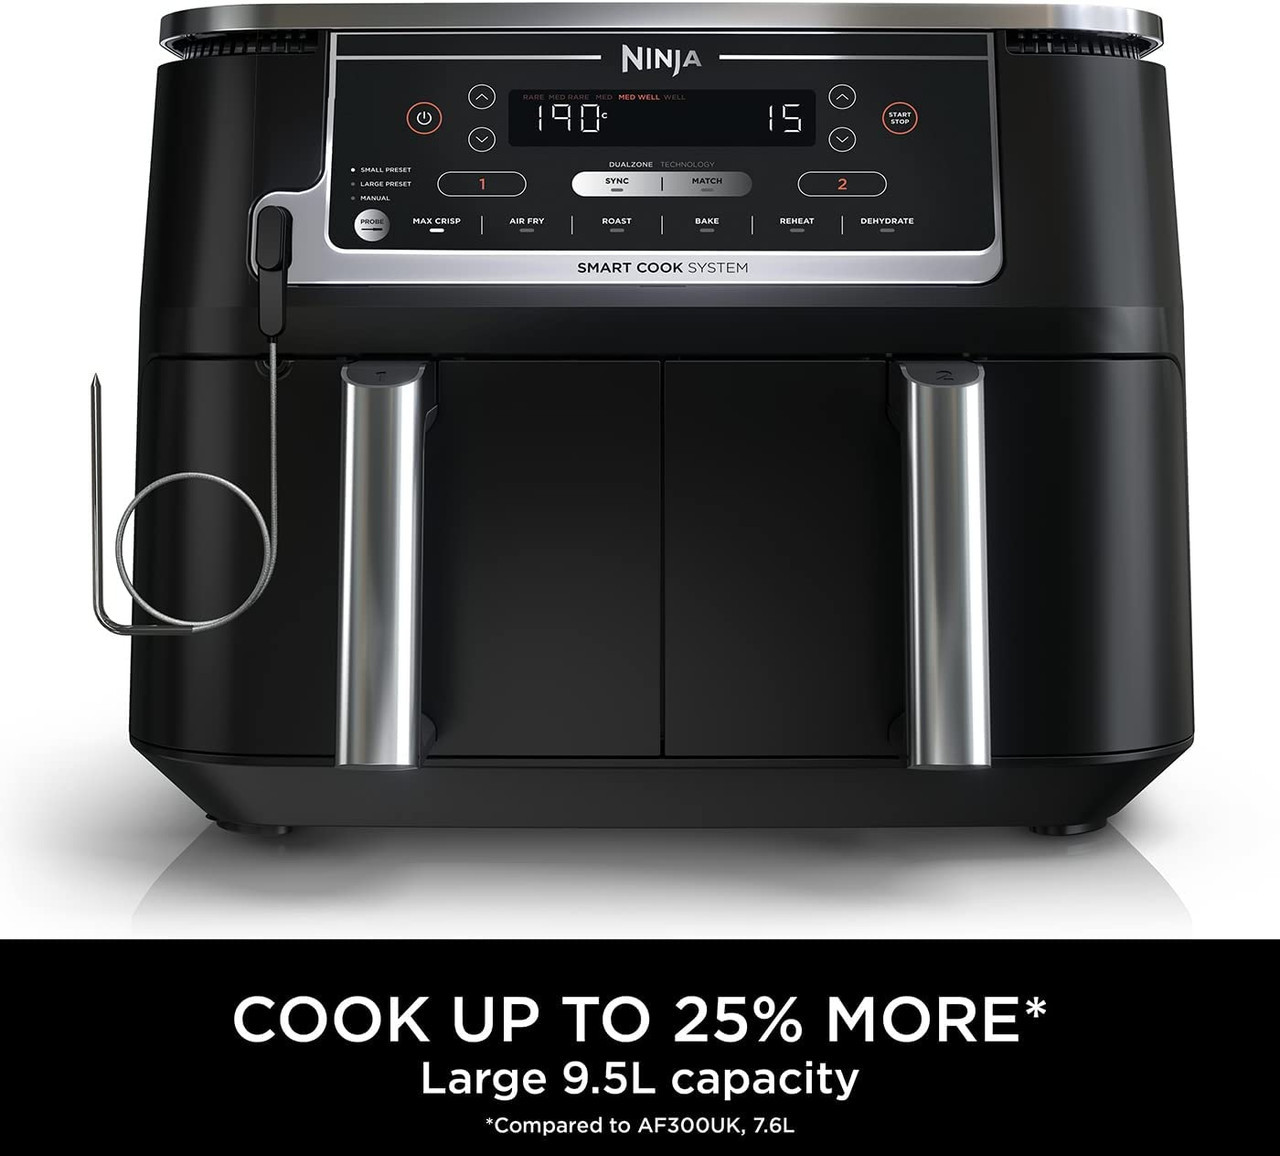 https://cdn11.bigcommerce.com/s-8ek7z3h3jn/images/stencil/1280x1280/products/8716/47585/ninja-foodi-max-dual-zone-air-fryer-with-smart-cook-system-or-af451uk__60868.1681526696.jpg?c=1?imbypass=on